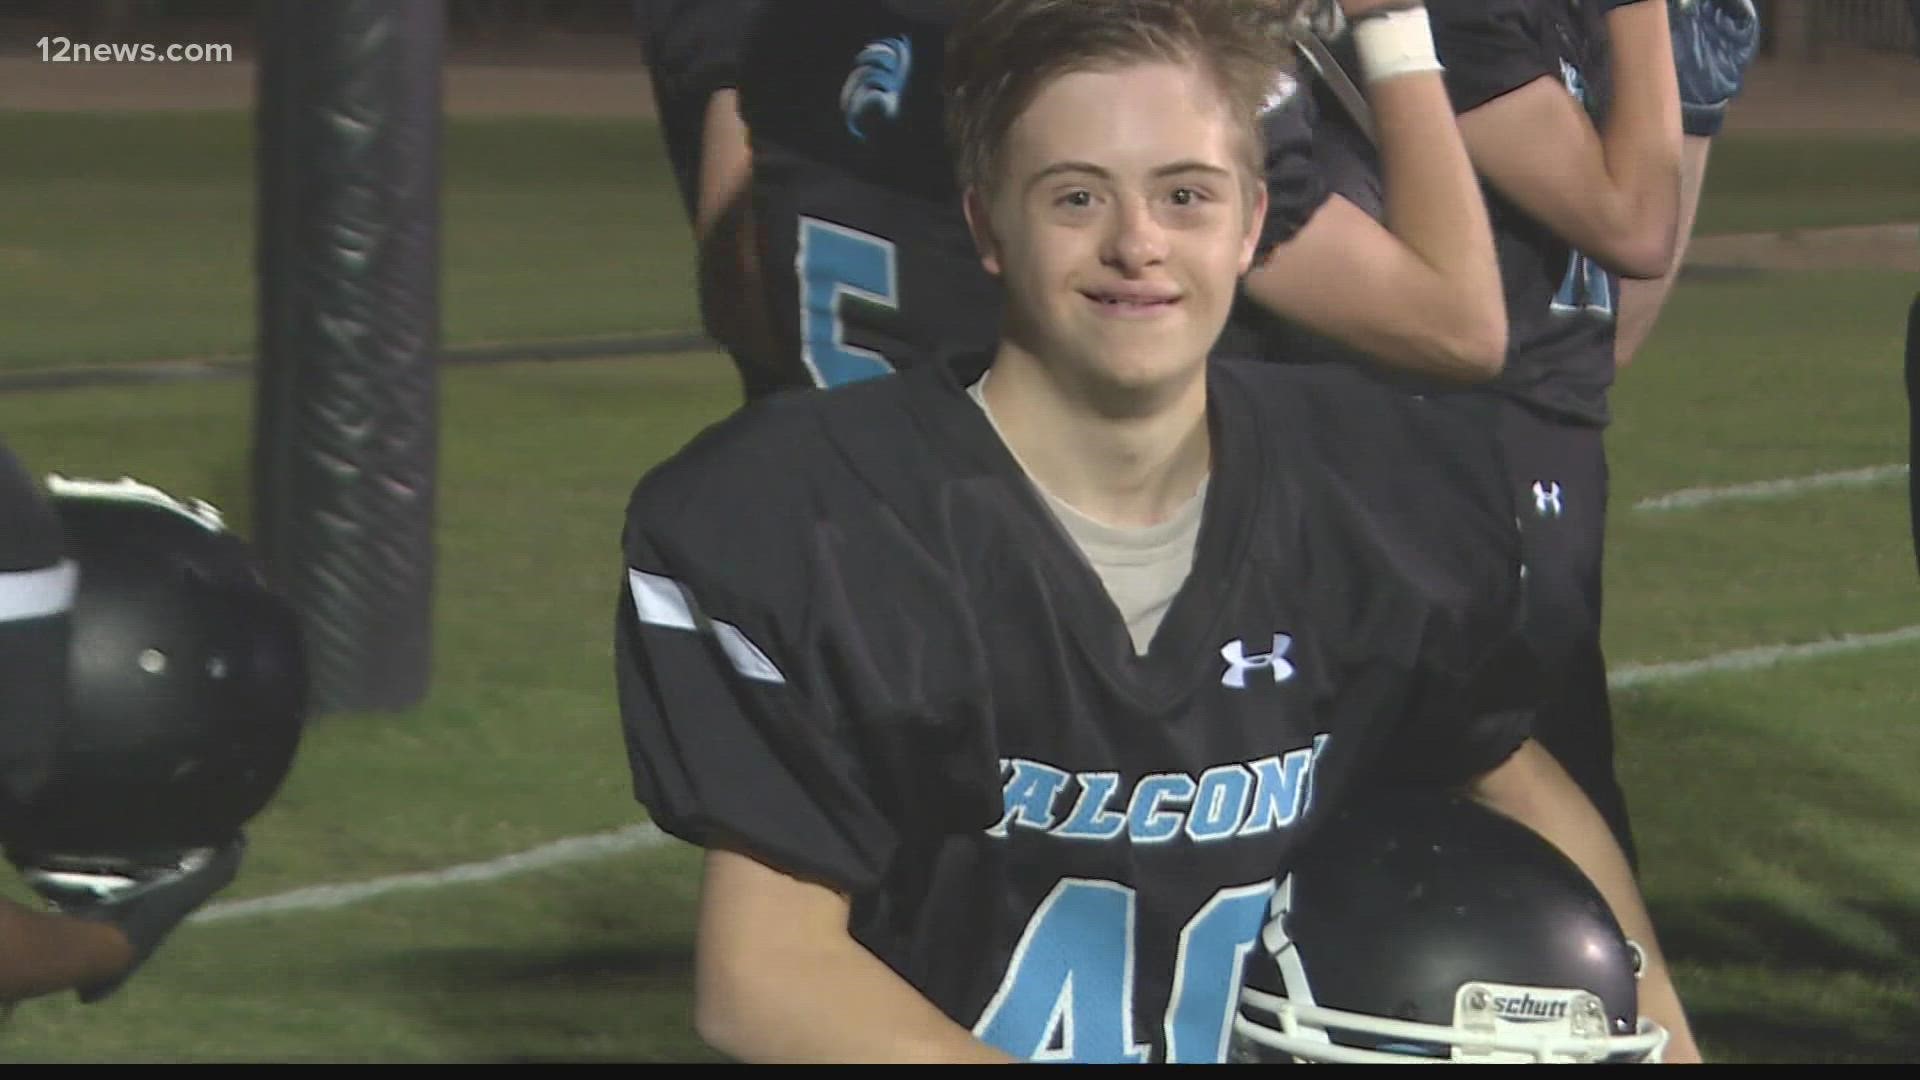 Friday night might be all about the scores and highlights for high school football players, but sometimes it's the stories that make the most impact.